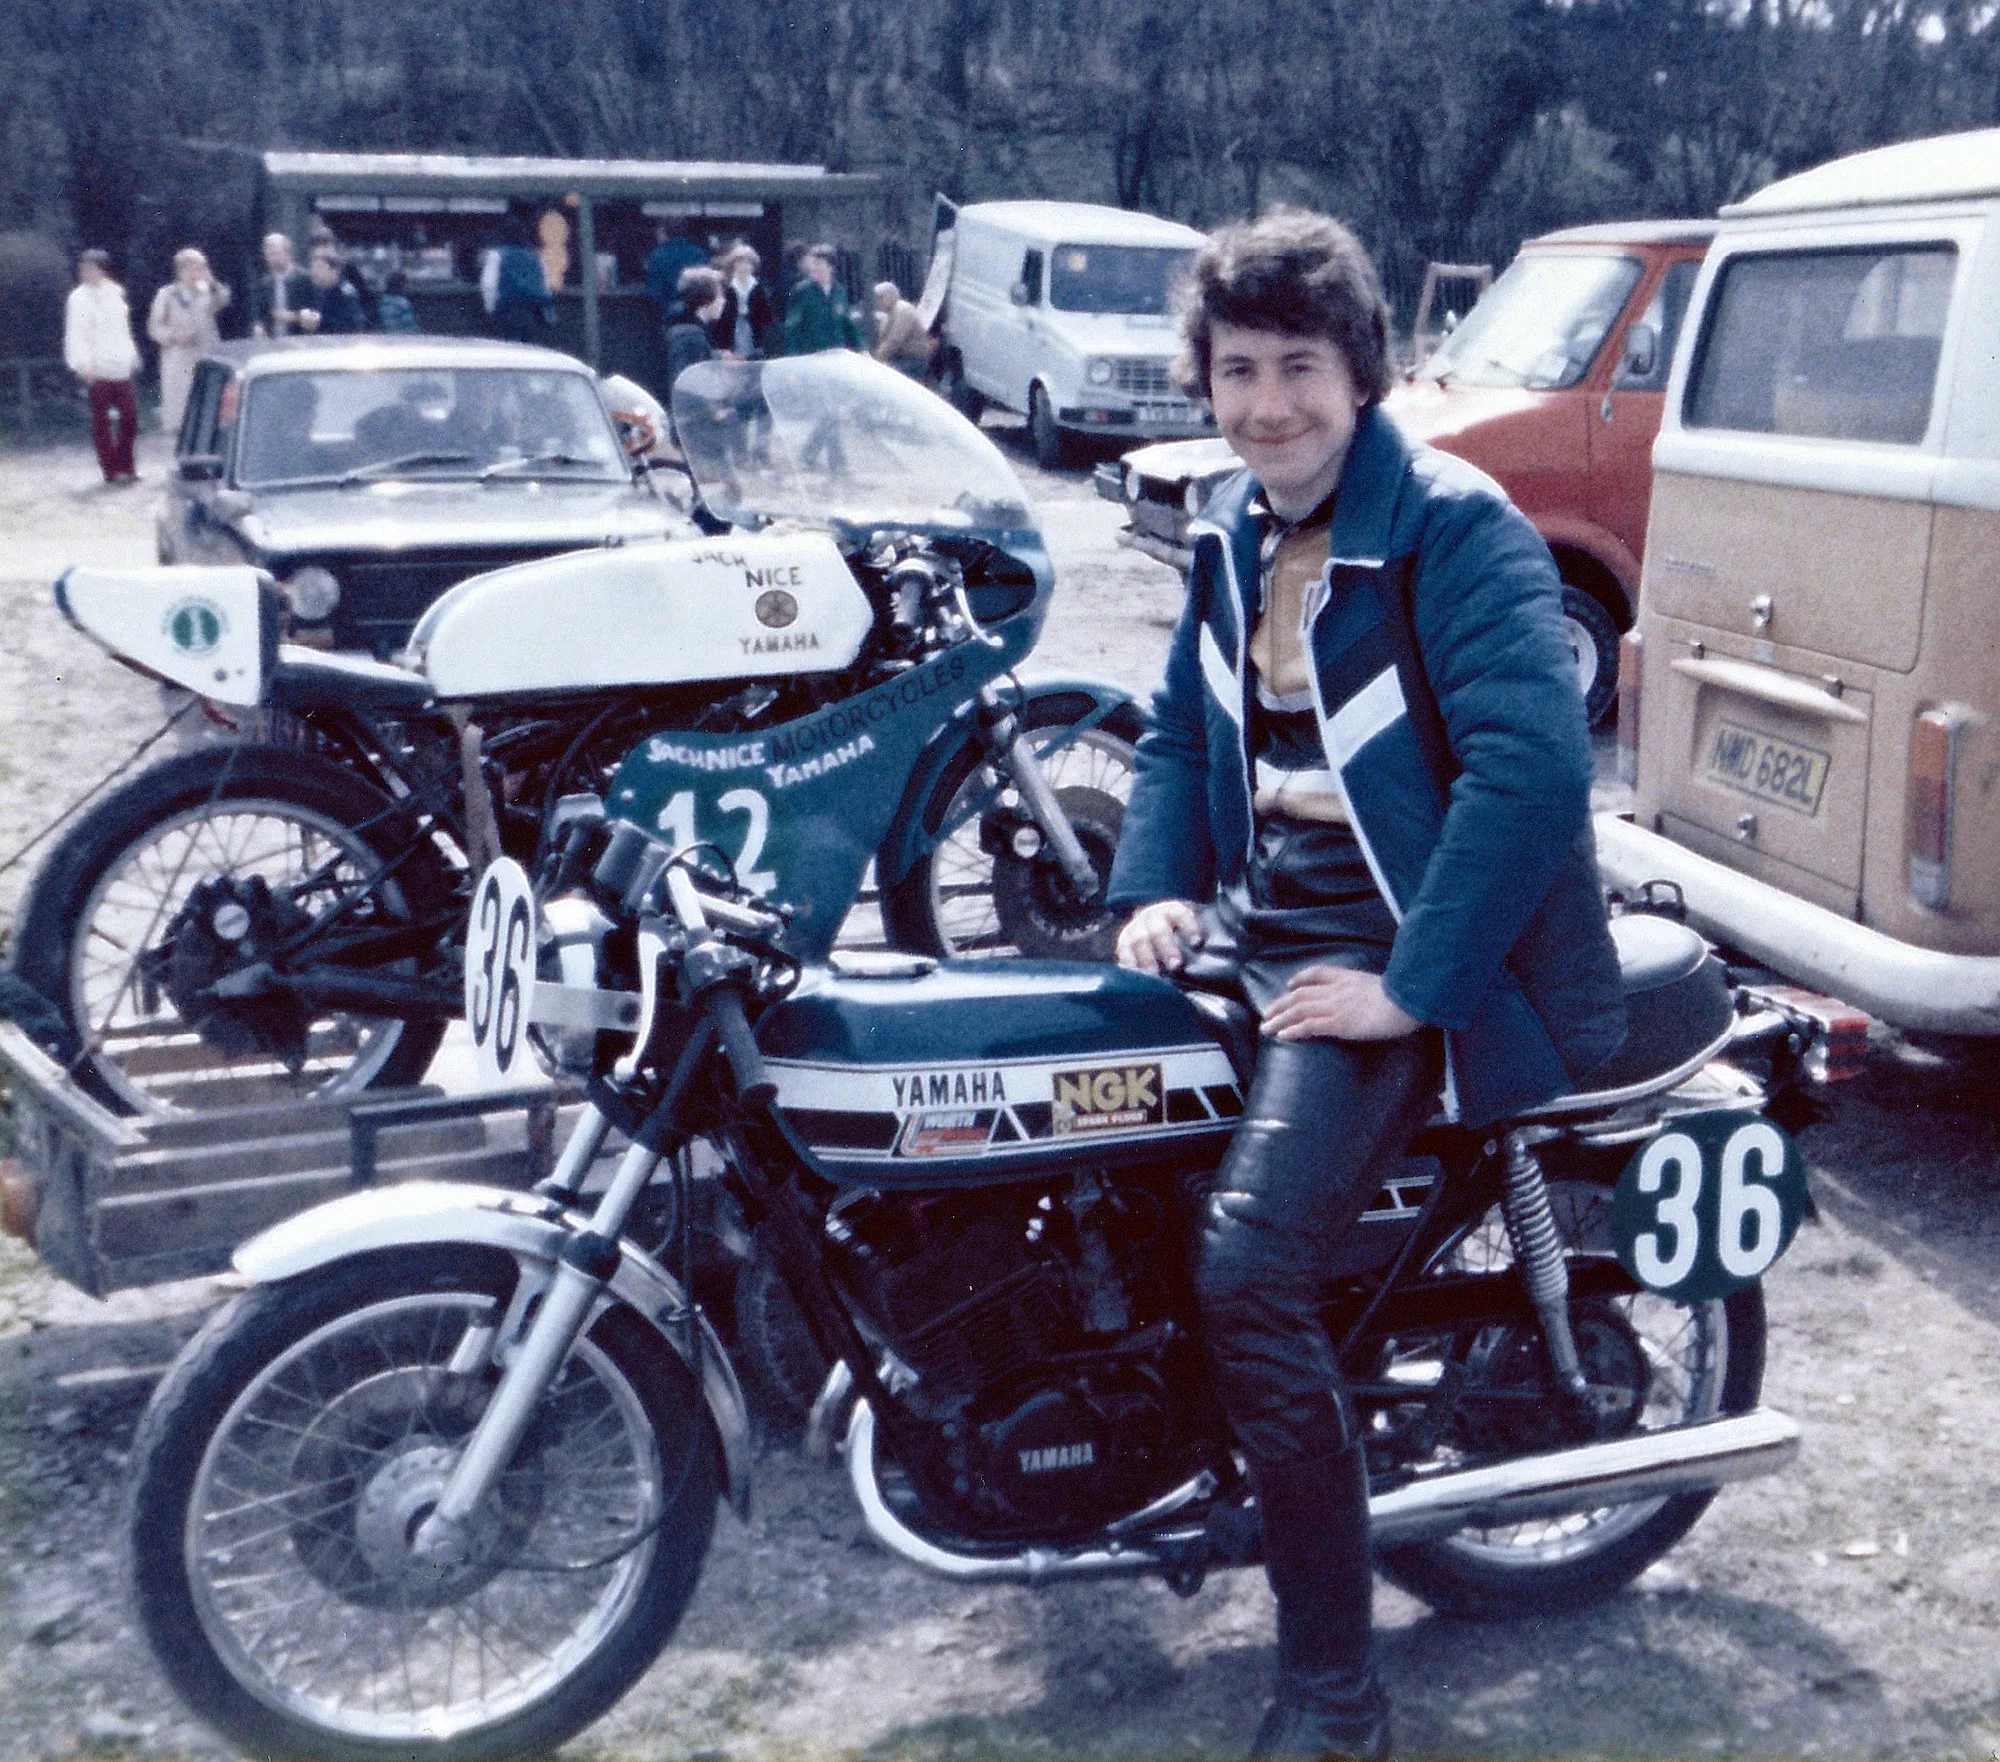 David Rose on a Yamaha RD250 Production Class racing motorcycle, in the paddock at the Lydden Hill circuit in Kent. It is dated June 1979.